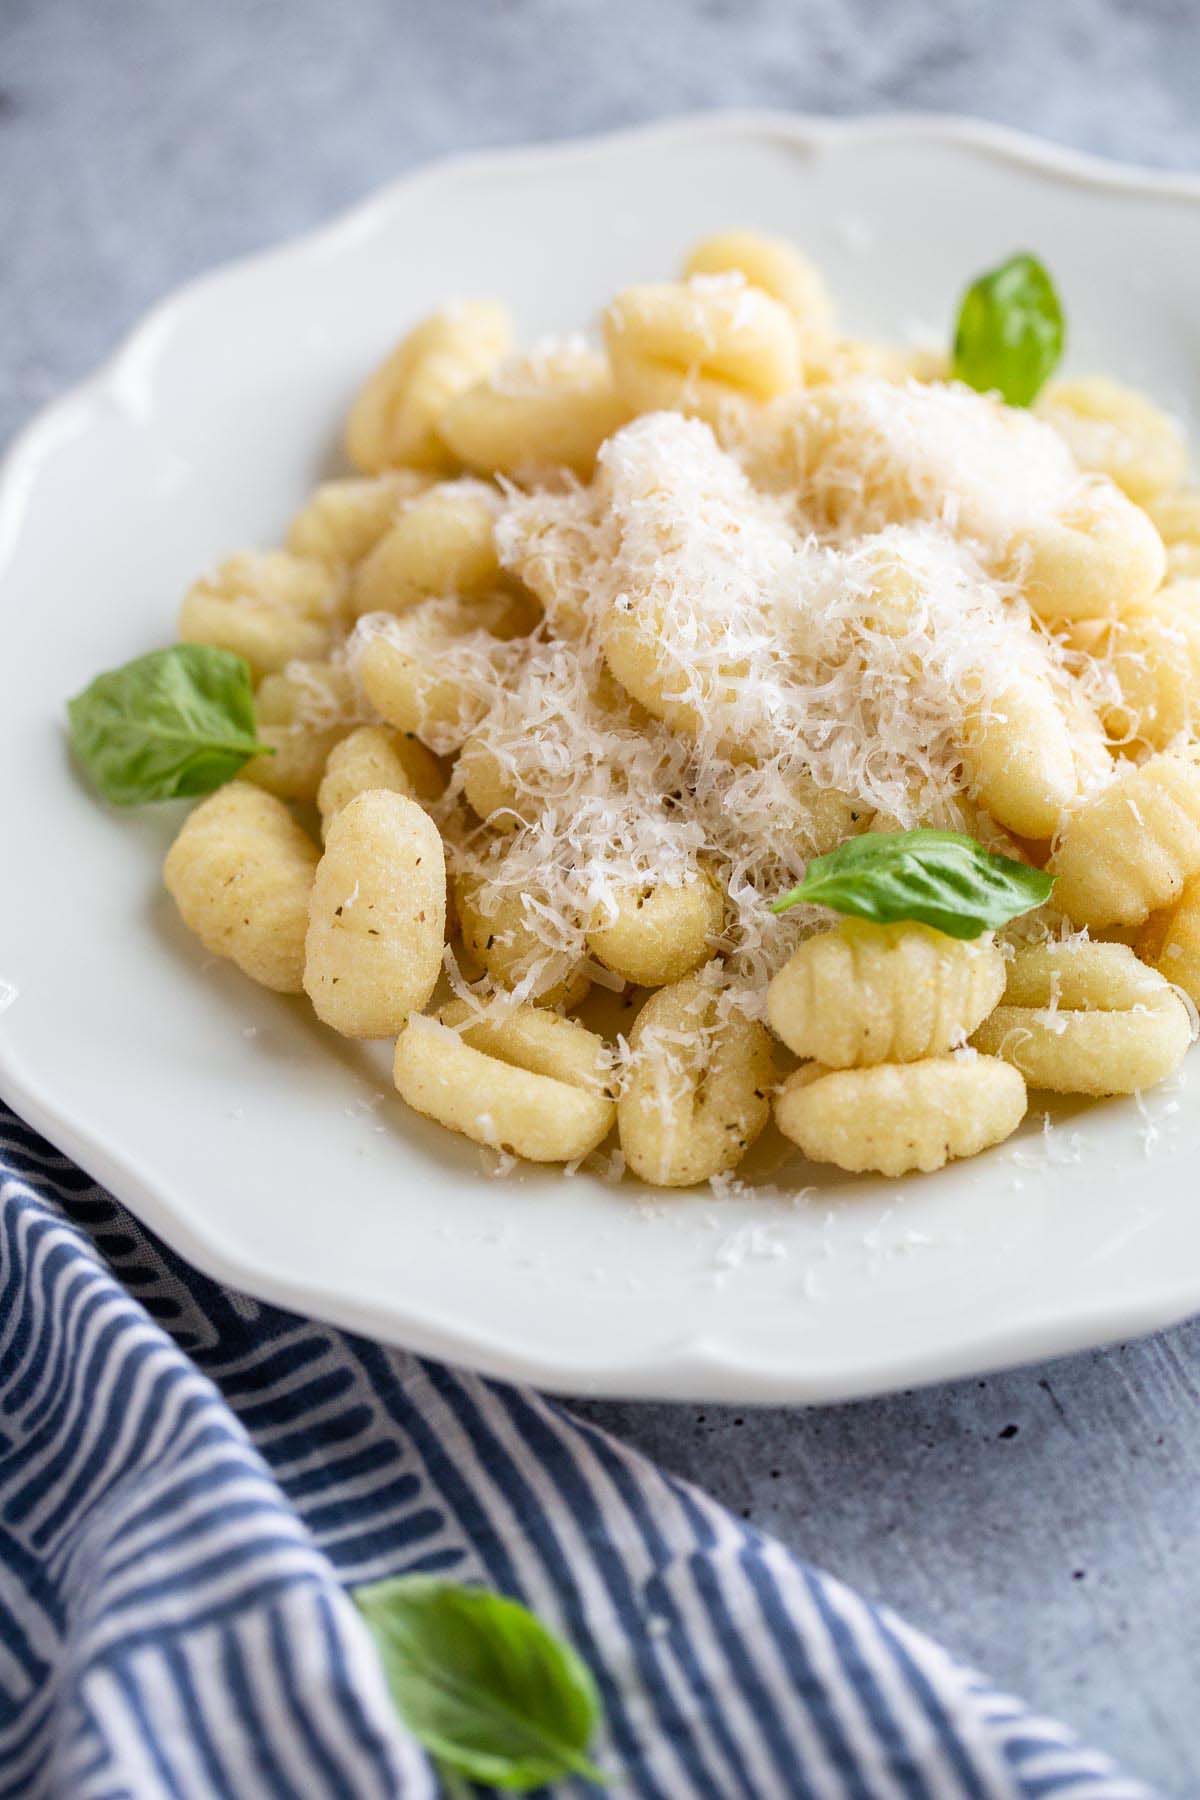 gnocchi on a plate with parmesan cheese and basil leaves.